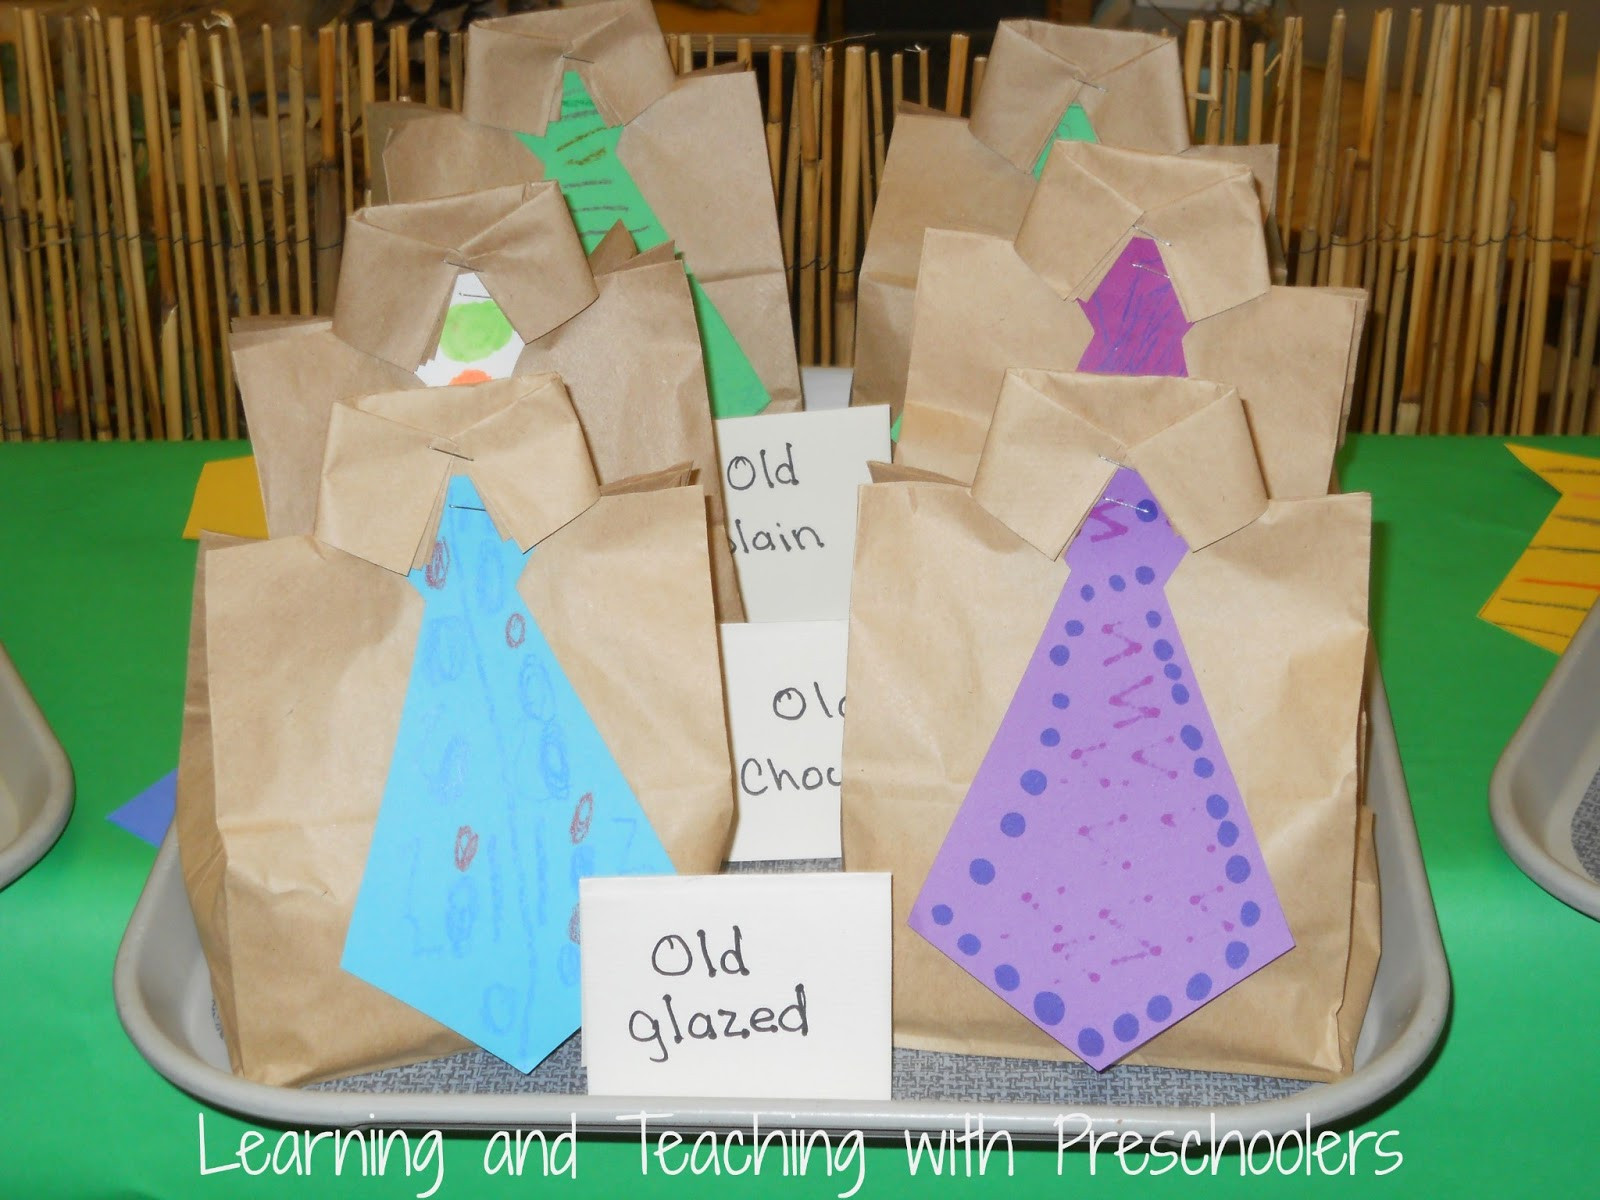 Preschool Fathers Day Ideas
 Learning and Teaching With Preschoolers Father s Day